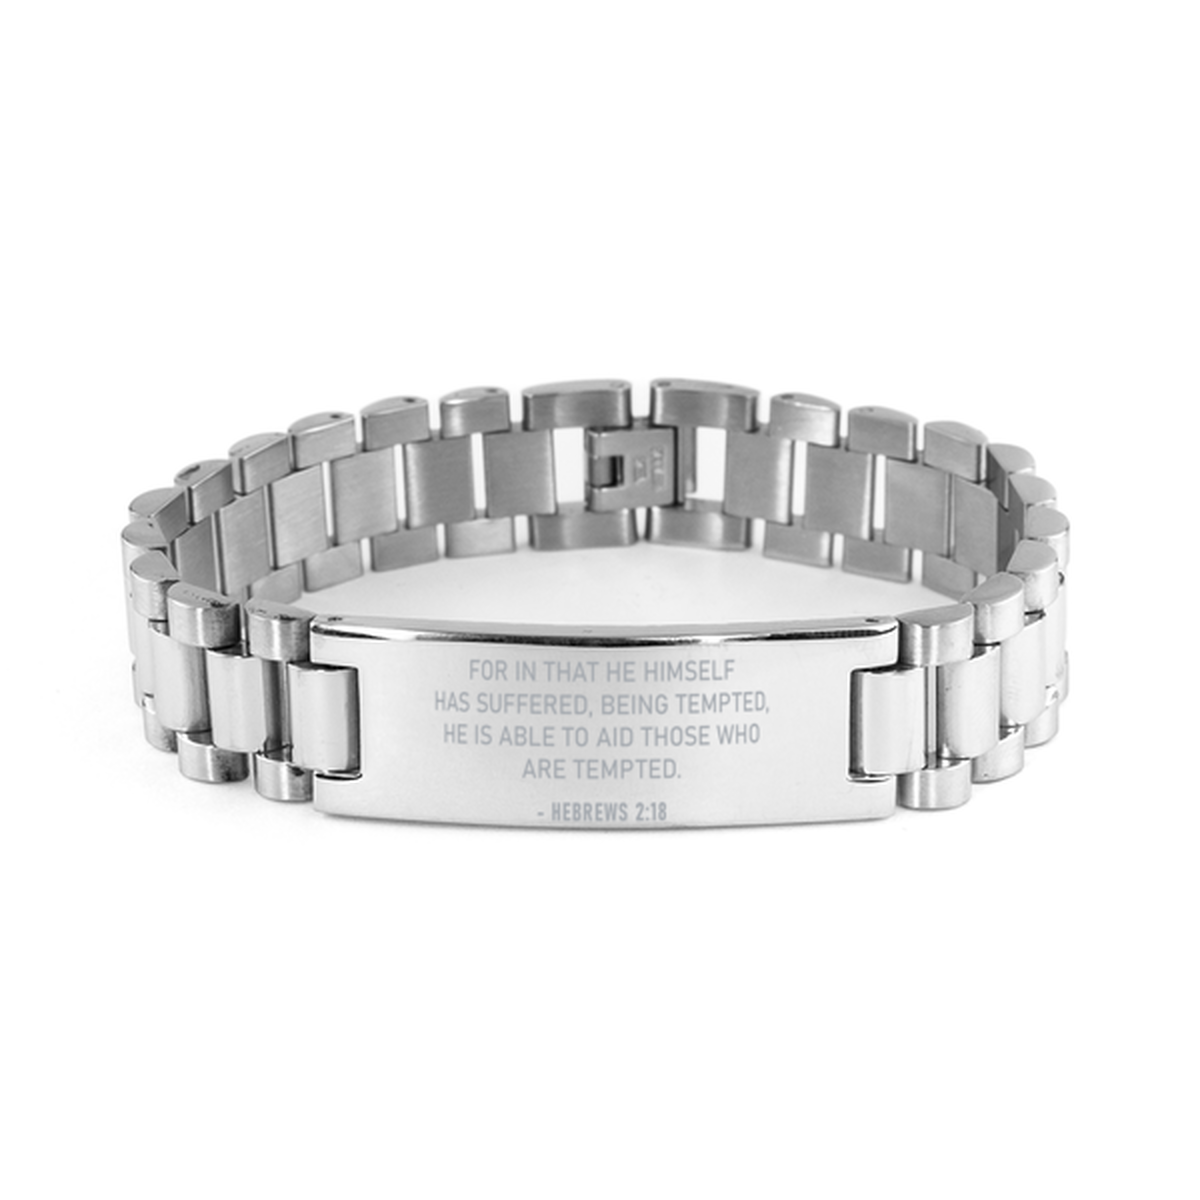 Christian Ladder Stainless Steel Bracelet, Hebrews 2:18 For In That He Himself Has Suffered, Being, Motivational Bible Verse Gifts For Men Women